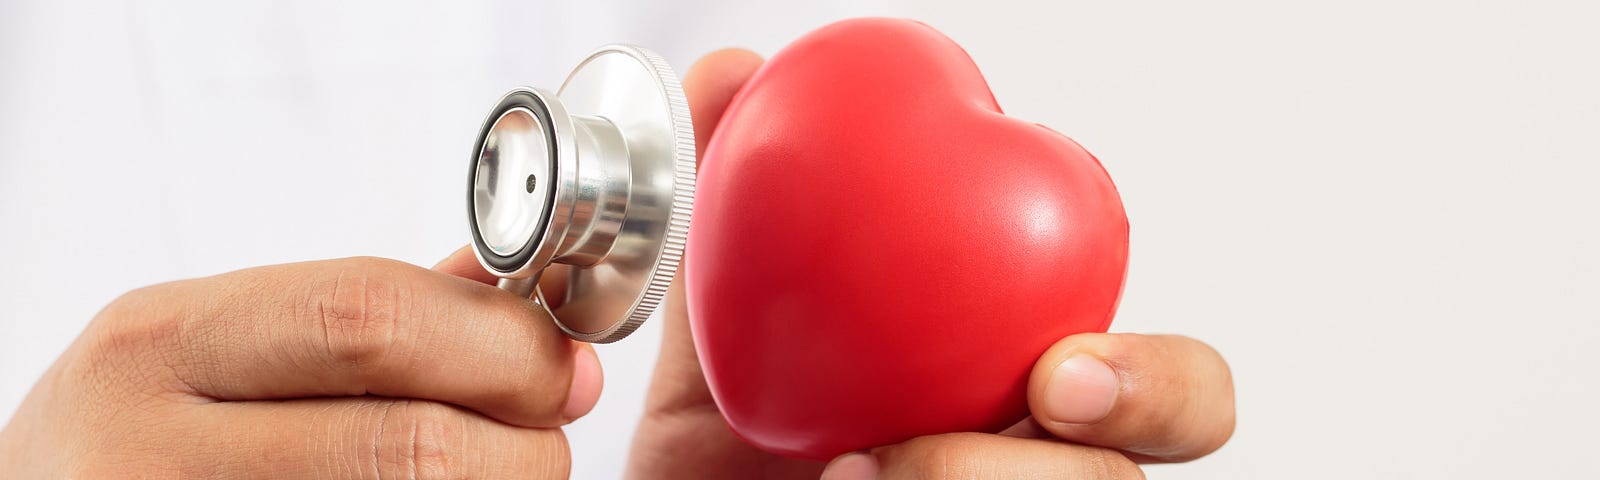 Someone holding a stethoscope and a miniature heart.